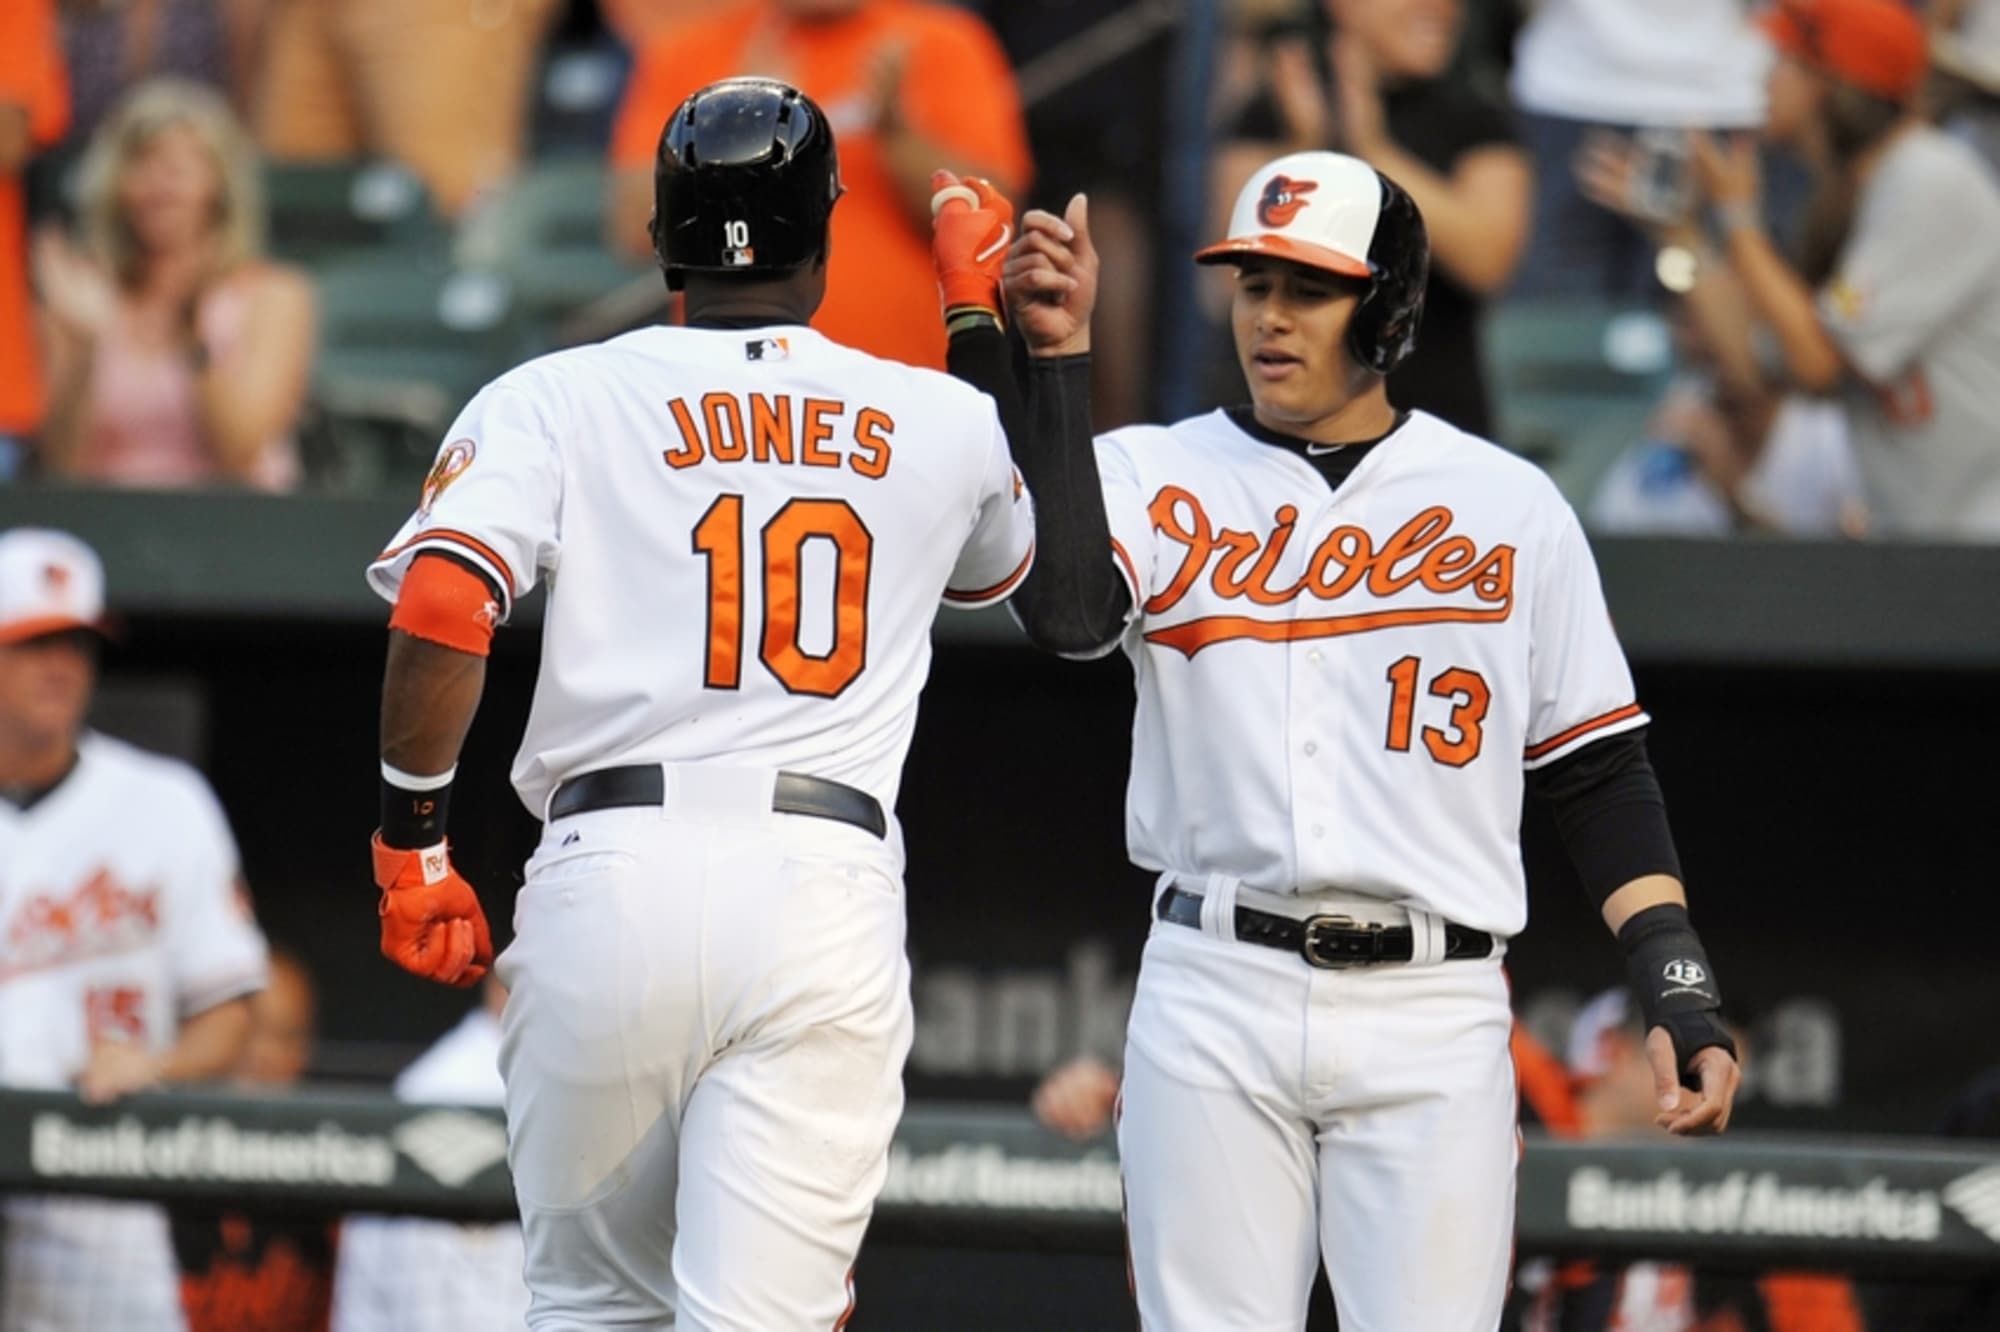 Matt Wieters' time as an Oriole was only a disappointment compared